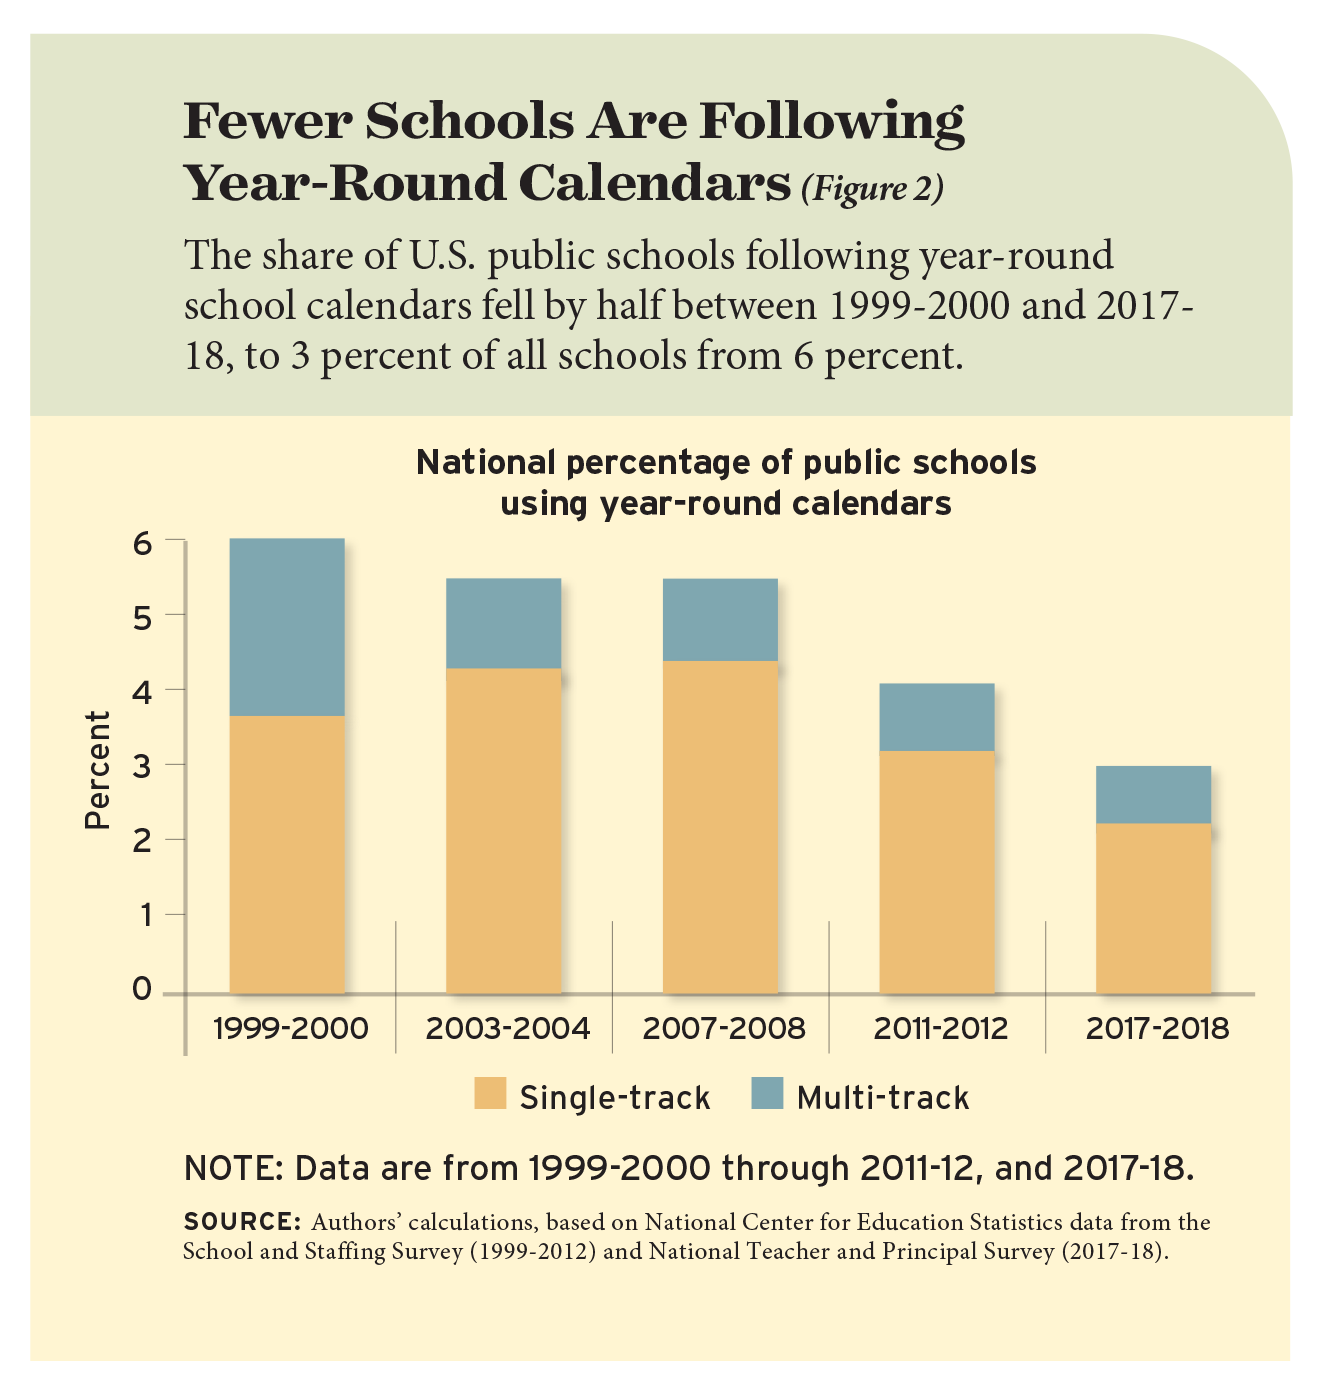 Fewer Schools Are Following Year-Round Calendars (Figure 2)